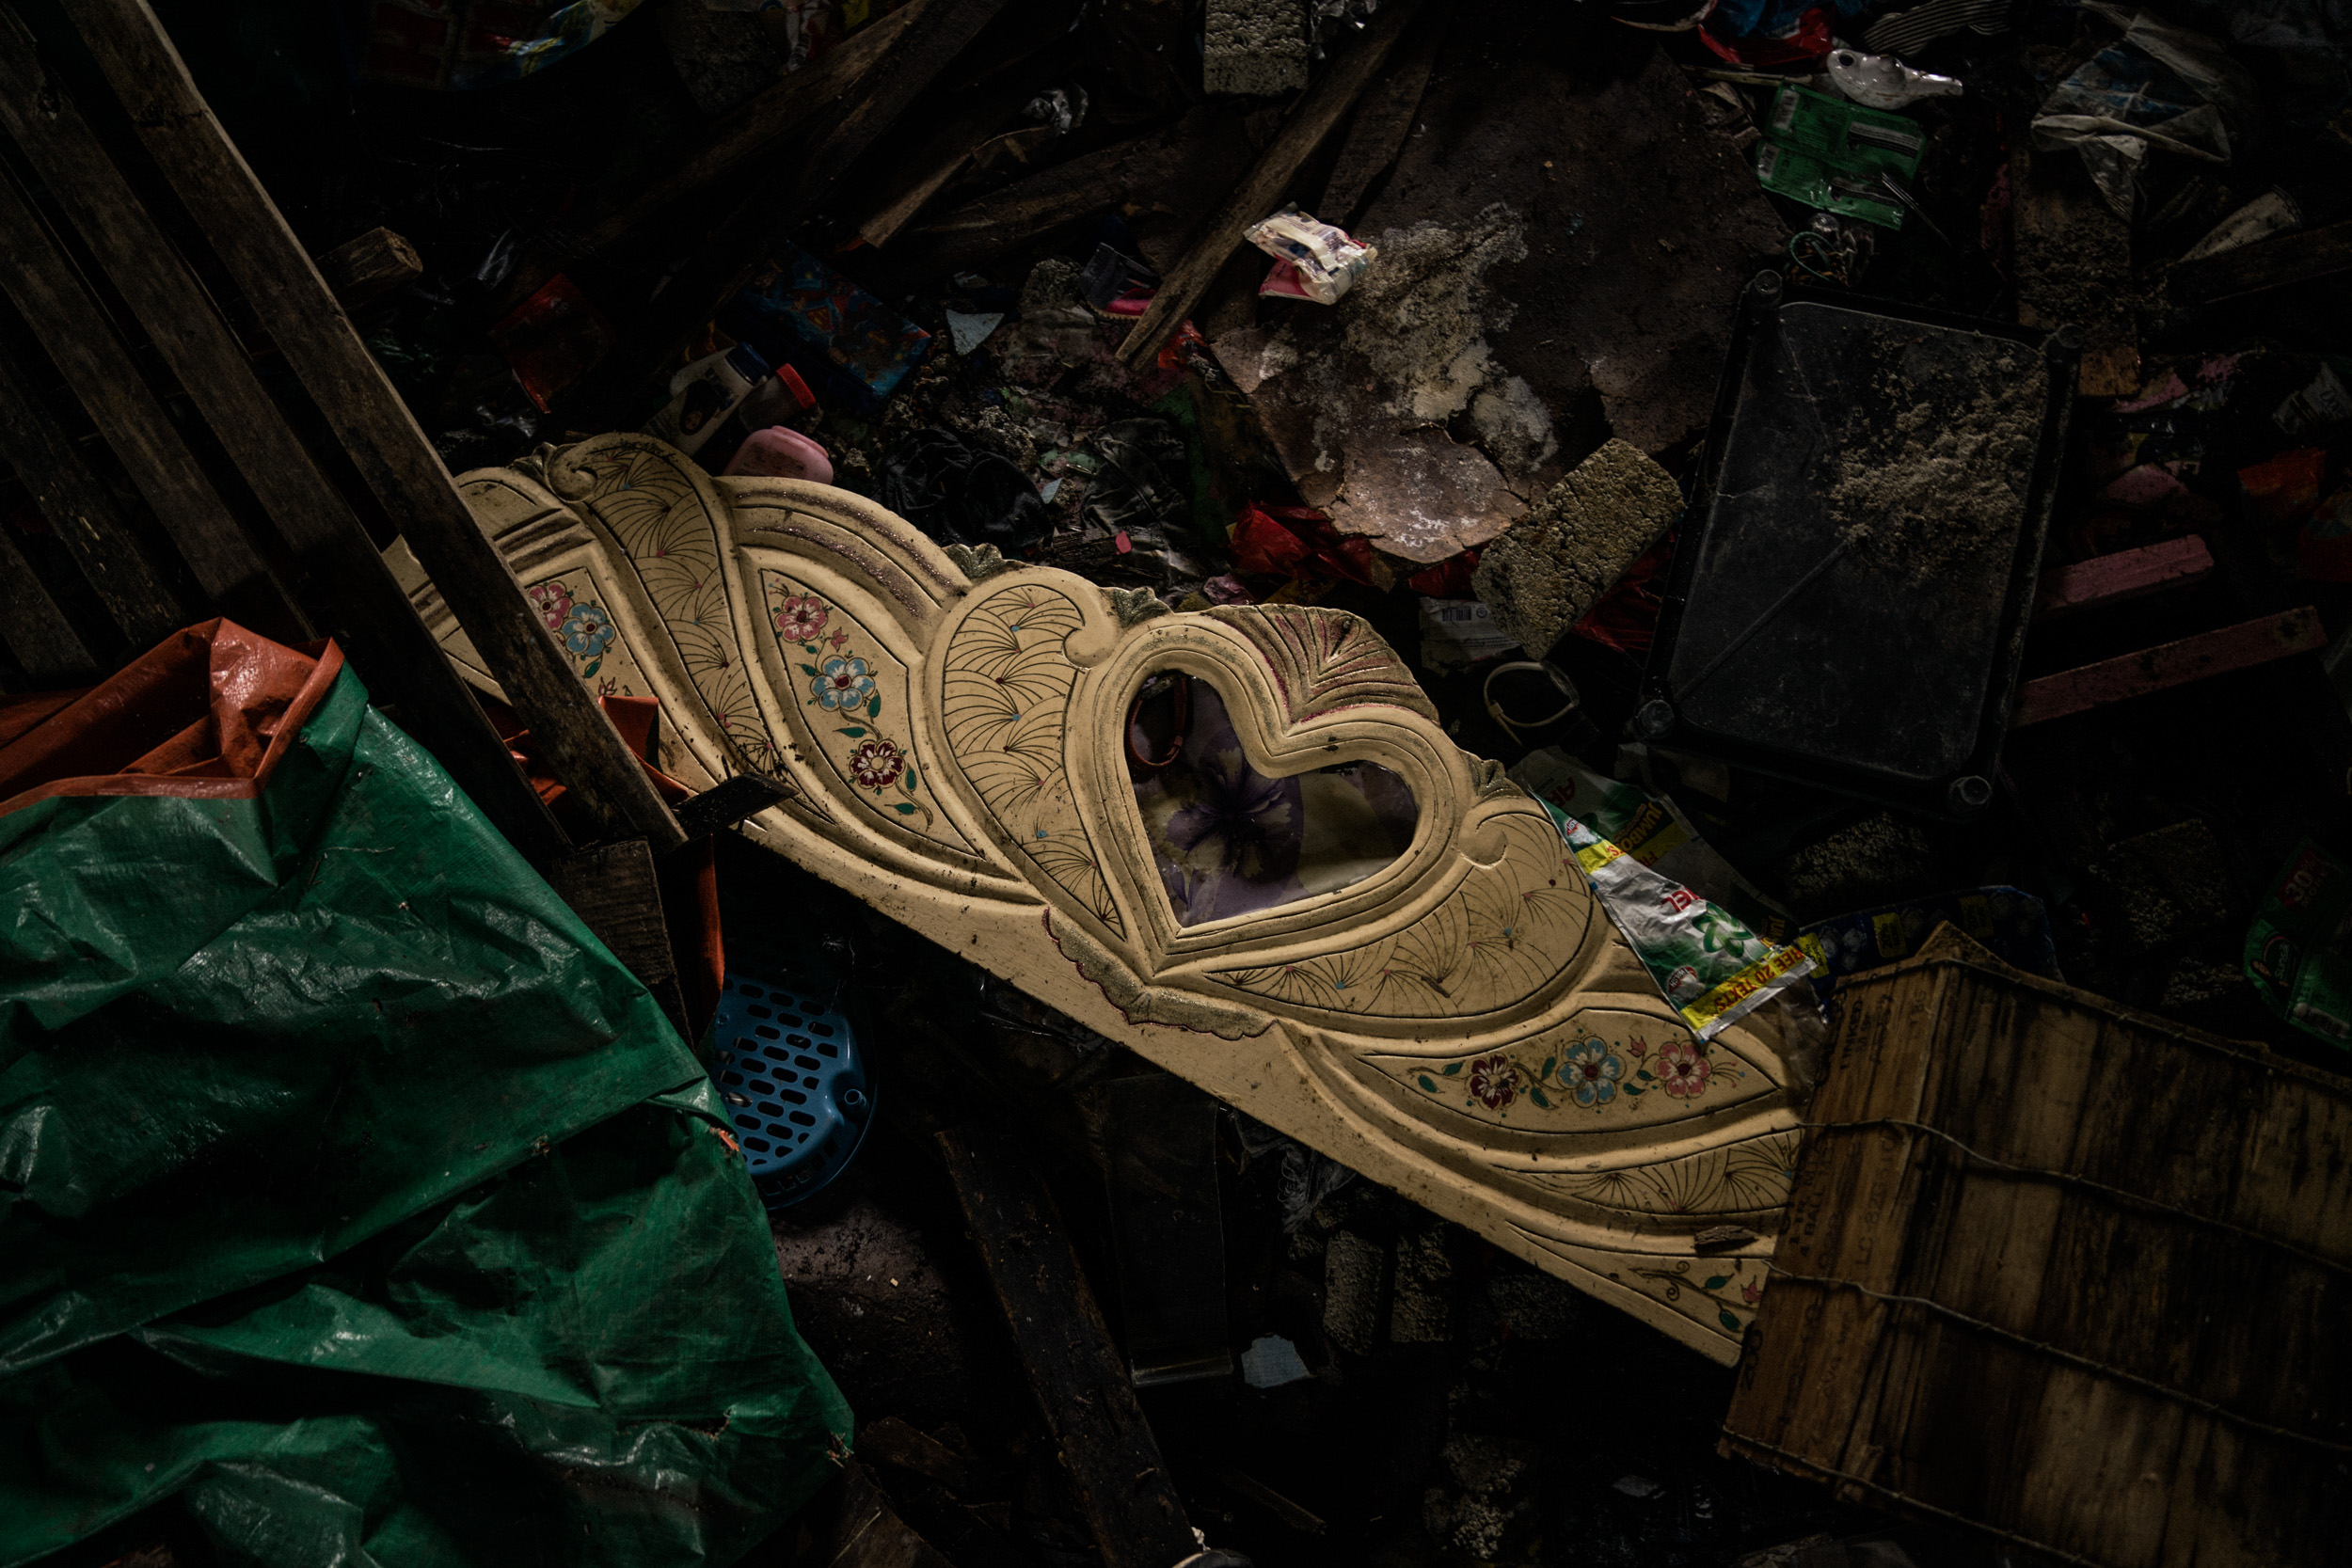  A headboard of a bed is seen in the rubble of the main battle area of the Marawi siege.  